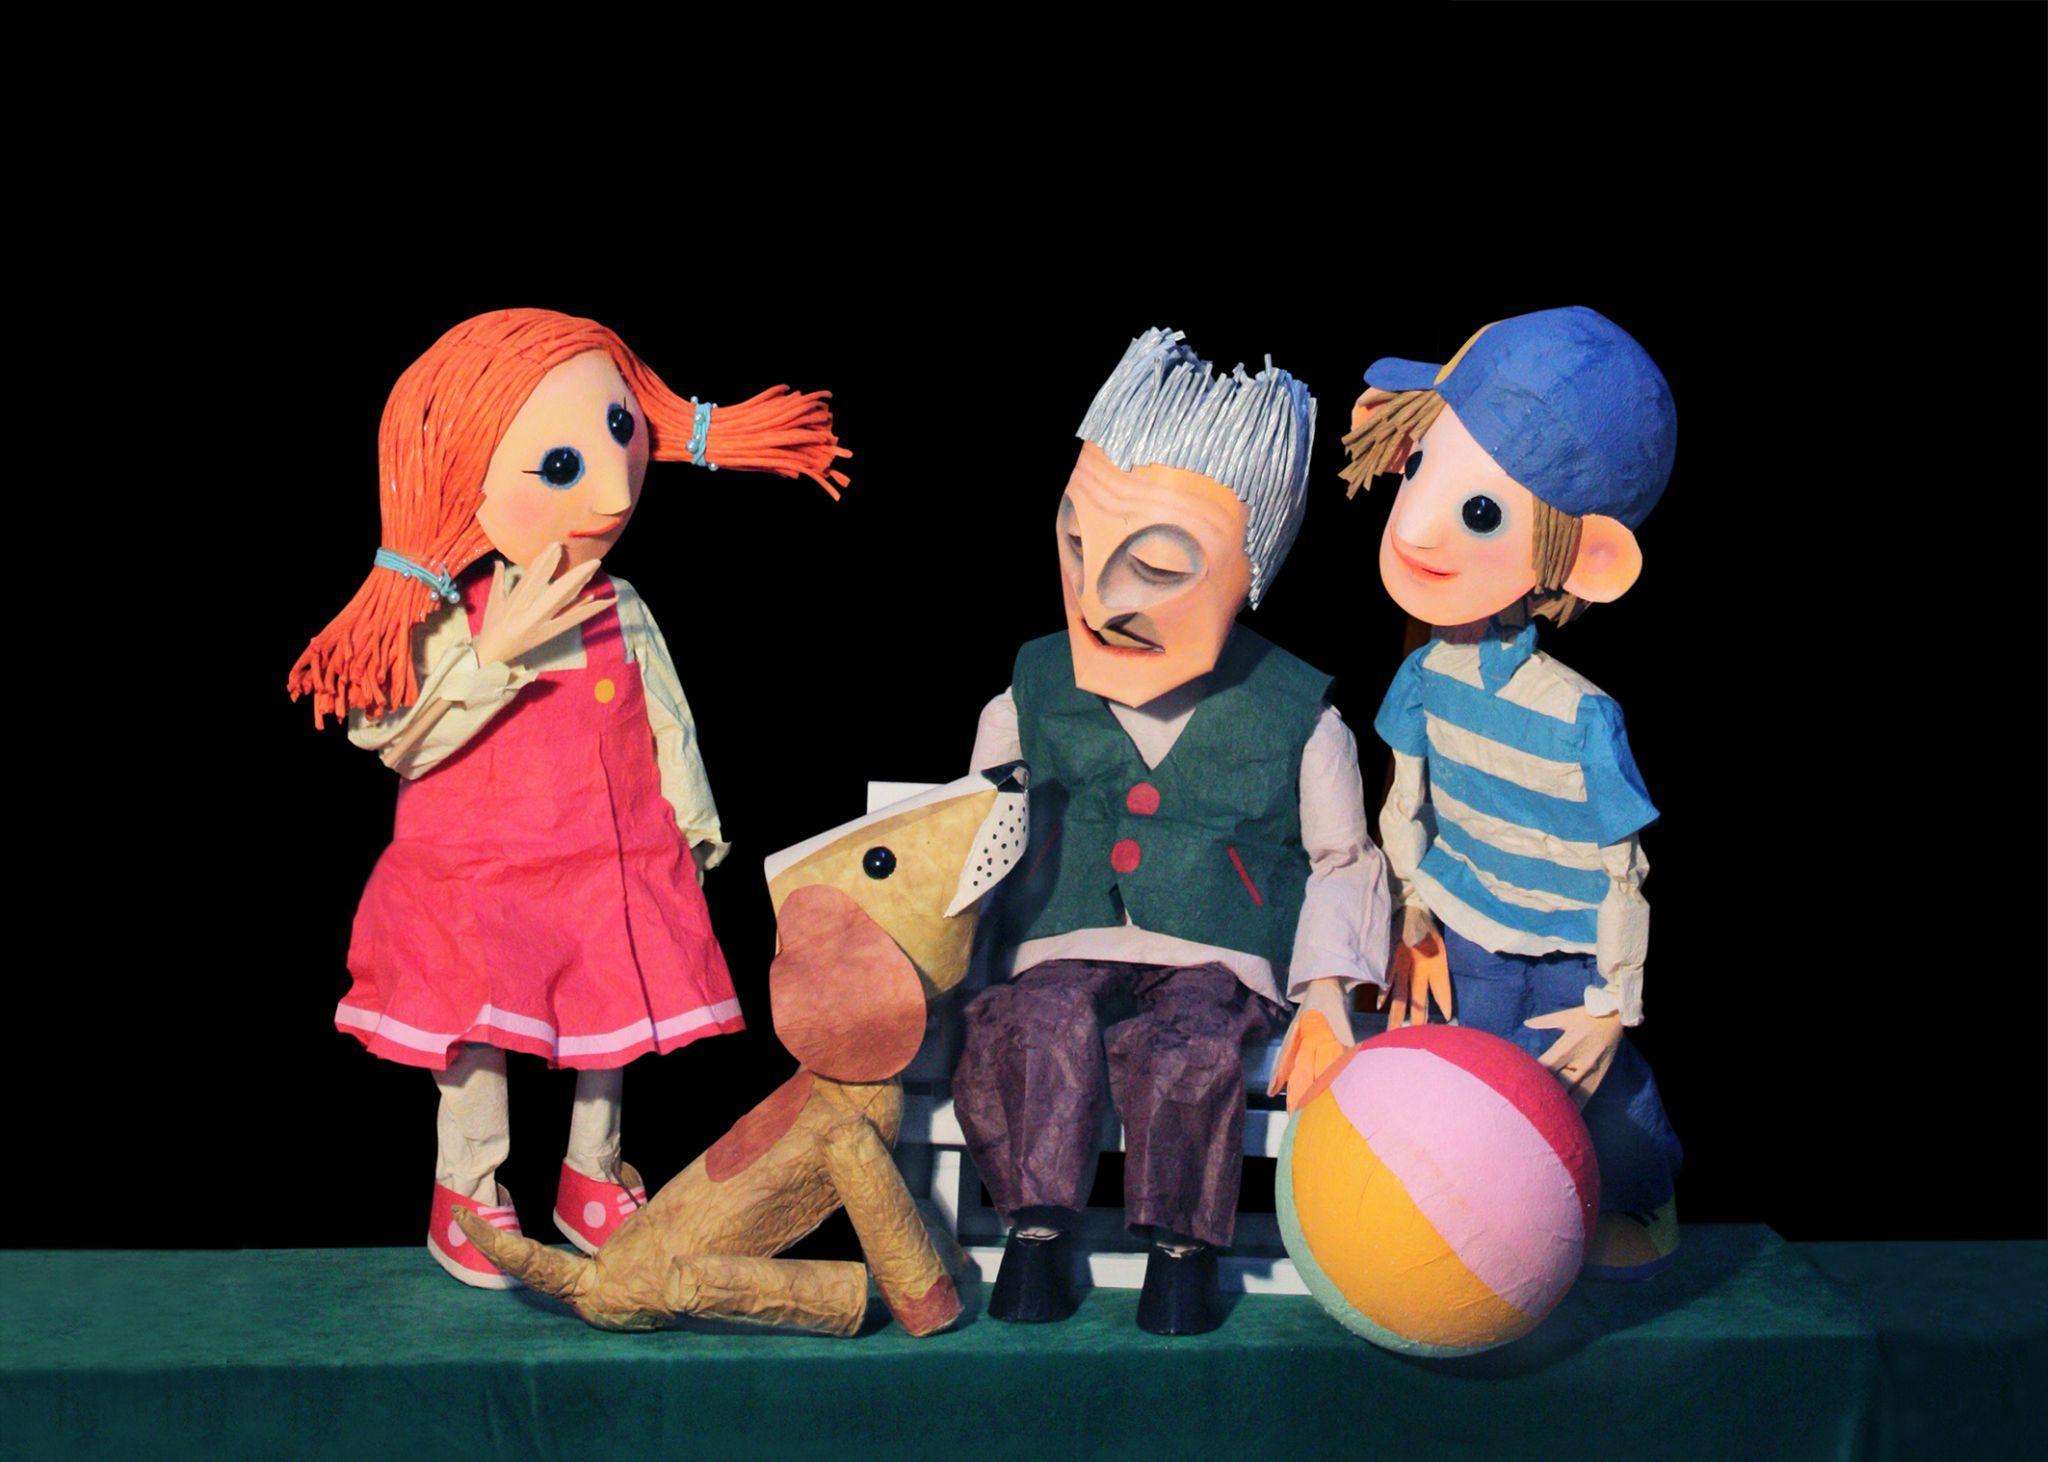 Award-winning Taiwanese puppet show to premiere at Flushing Town Hall in August Xxx Pic Hd